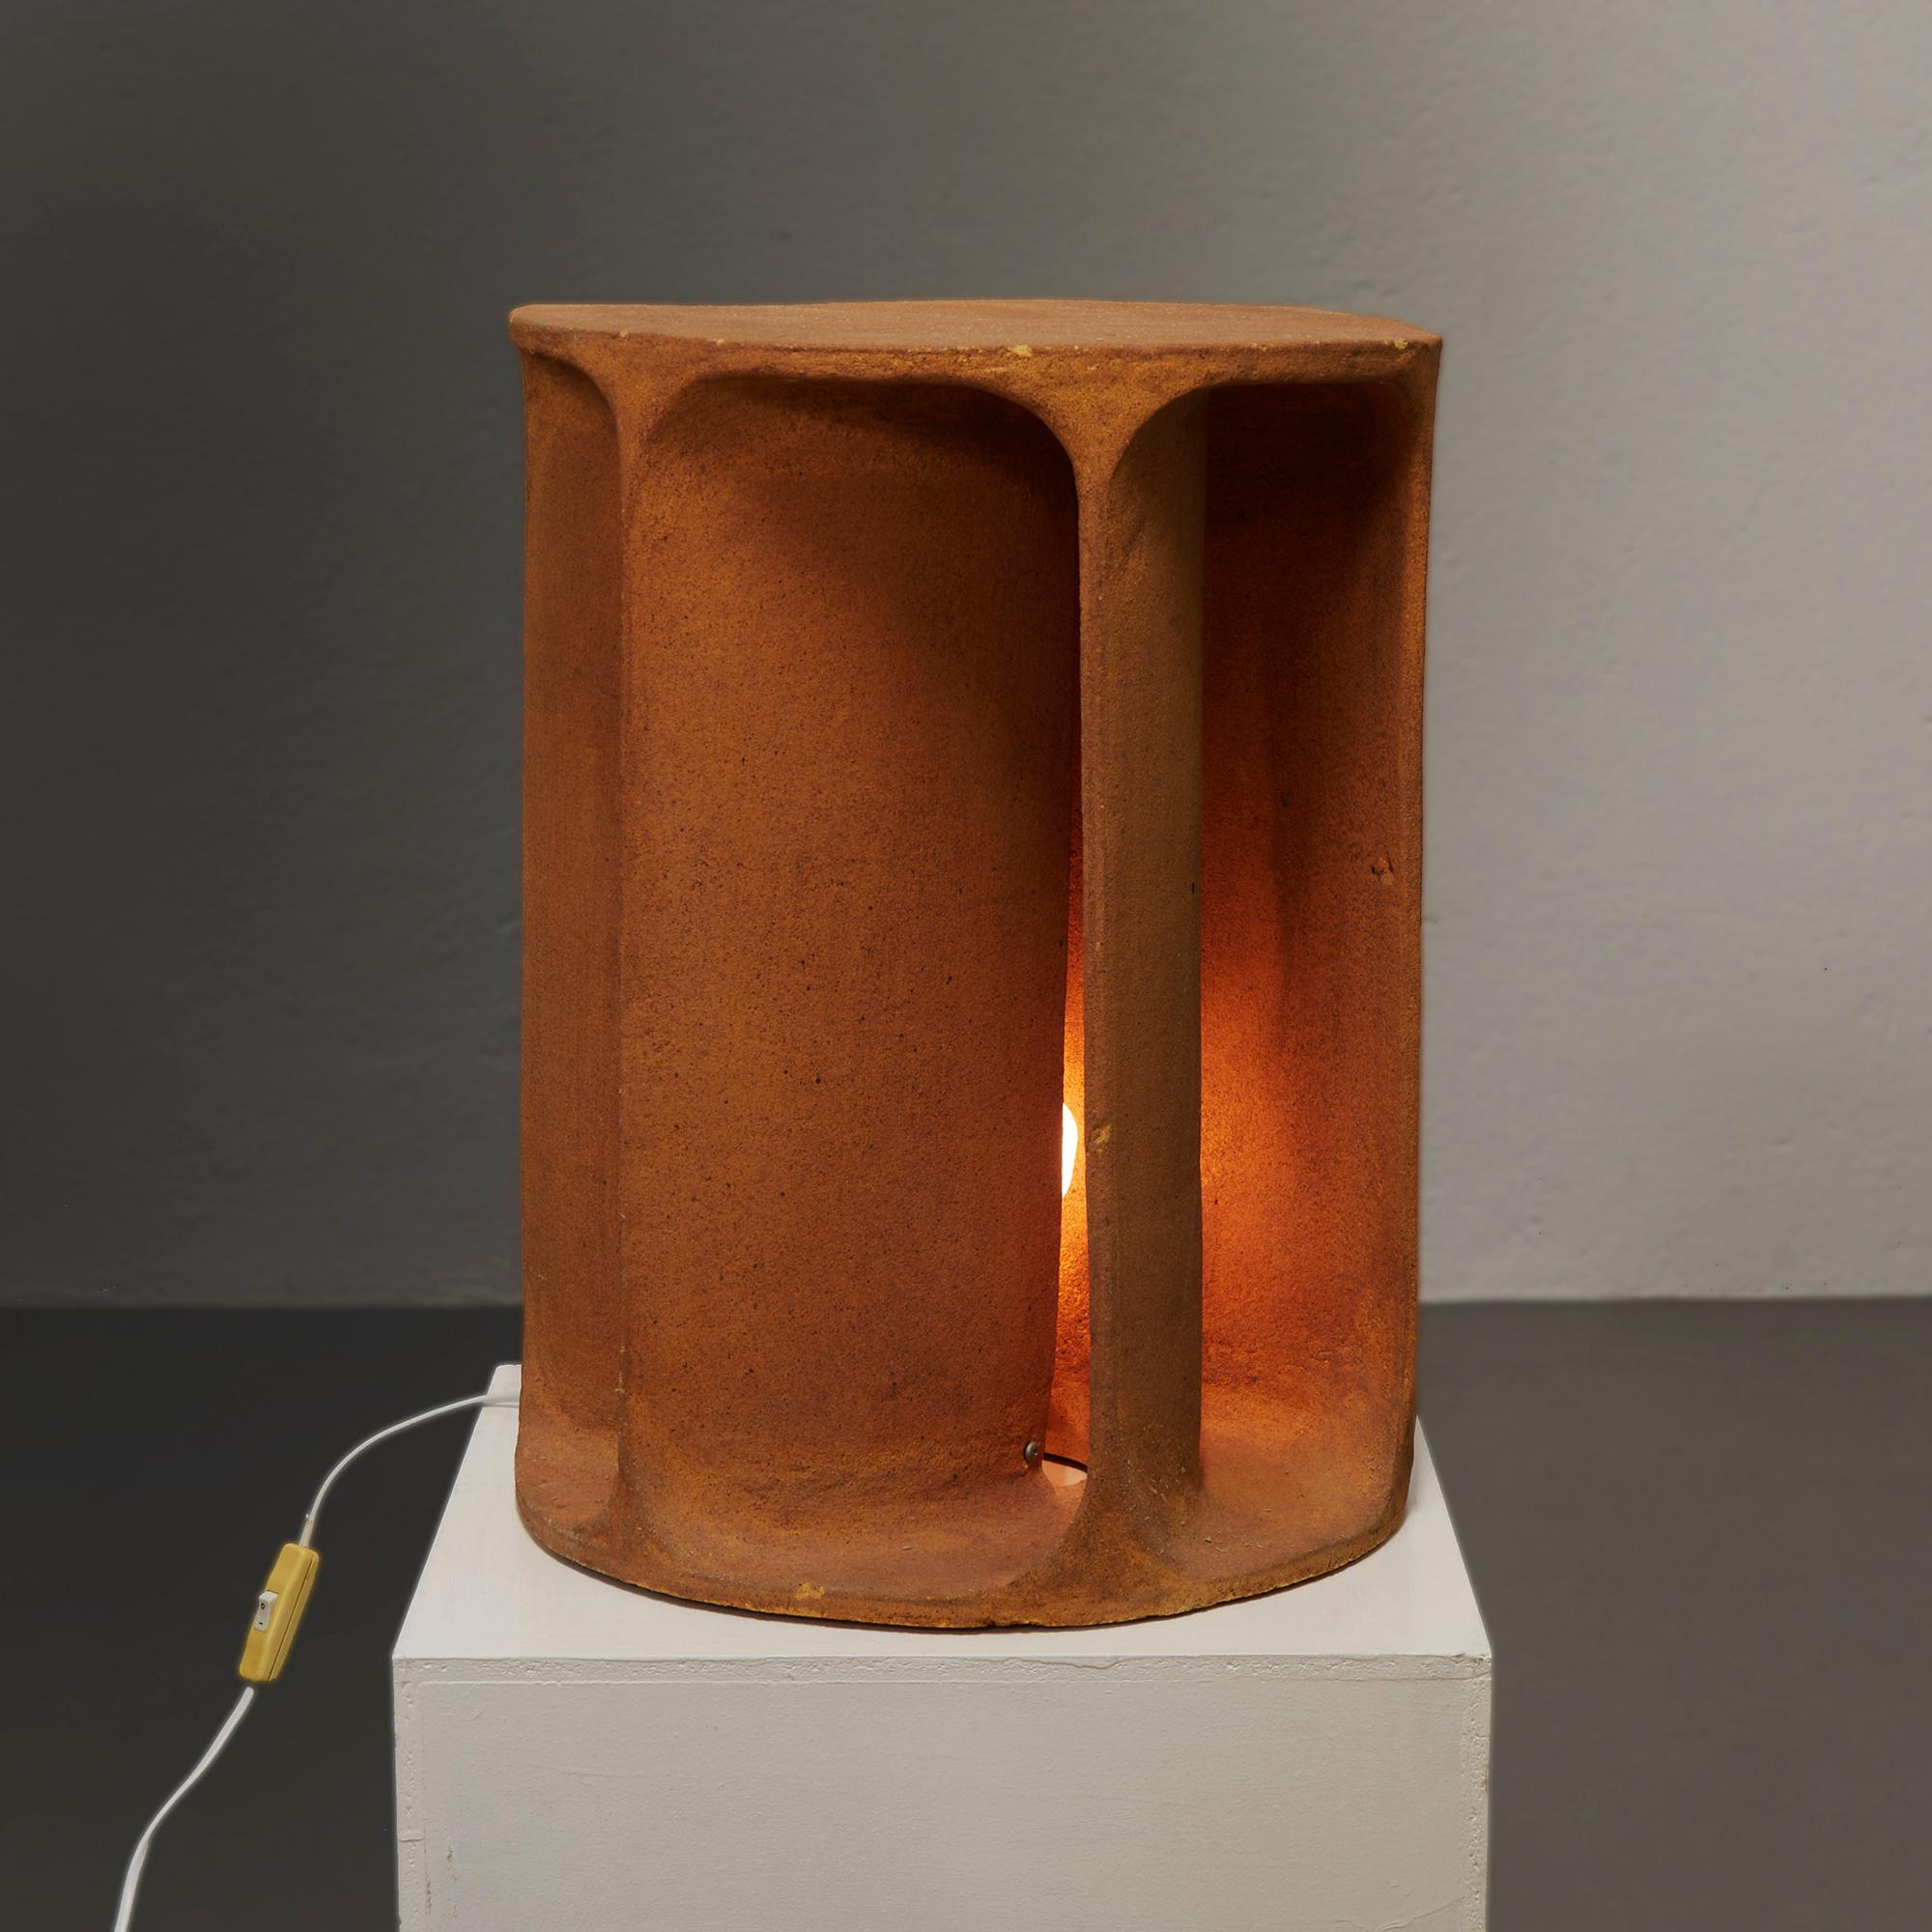 Brutalist Illuminated Lighting Sculpture or Table Lamp by Guy Bareff, France c. 1970 For Sale